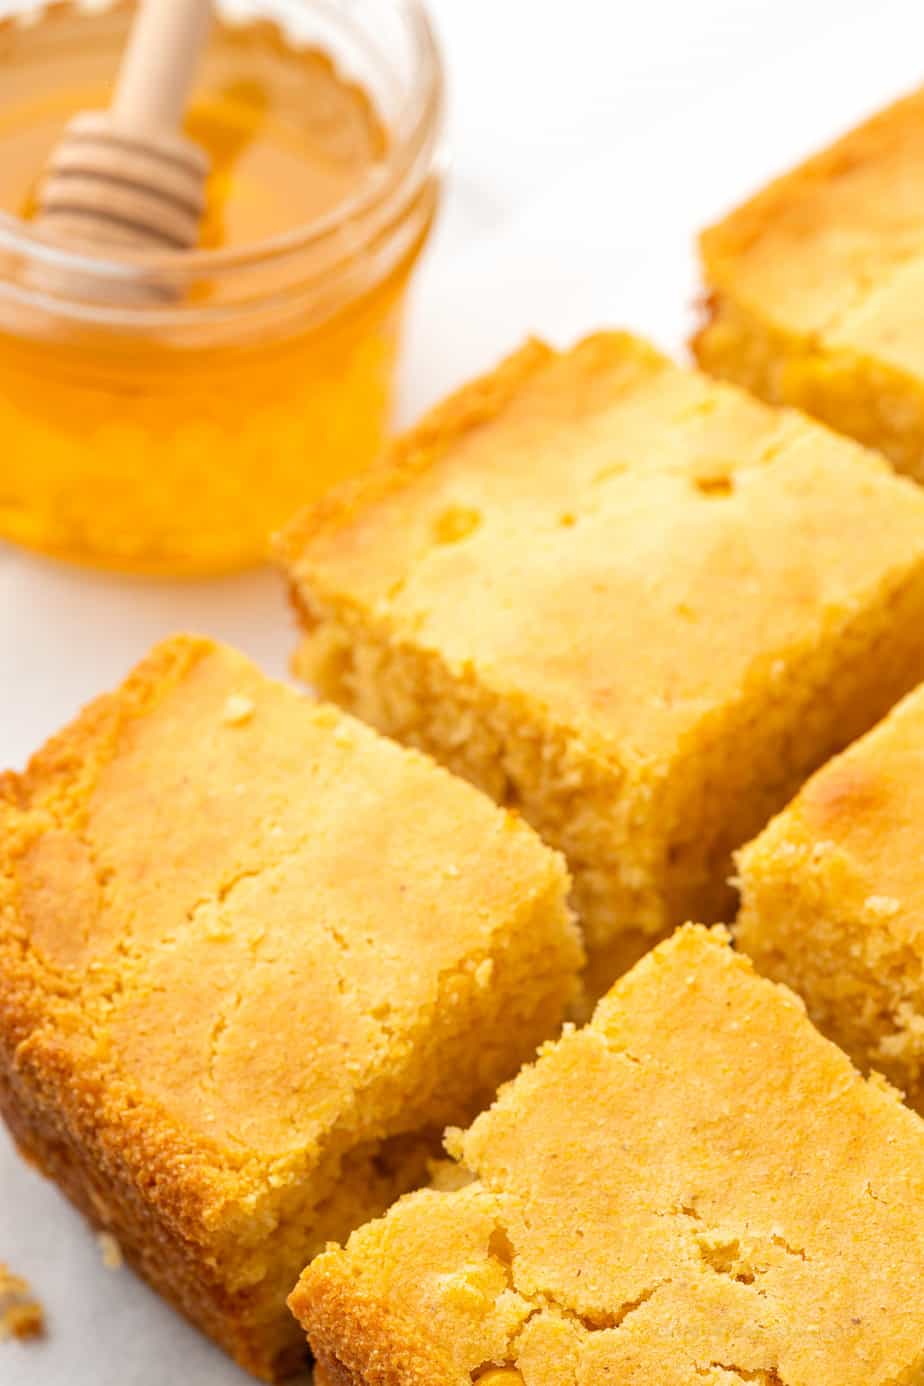 An angled view of cornbread sliced with a jar of honey in the background